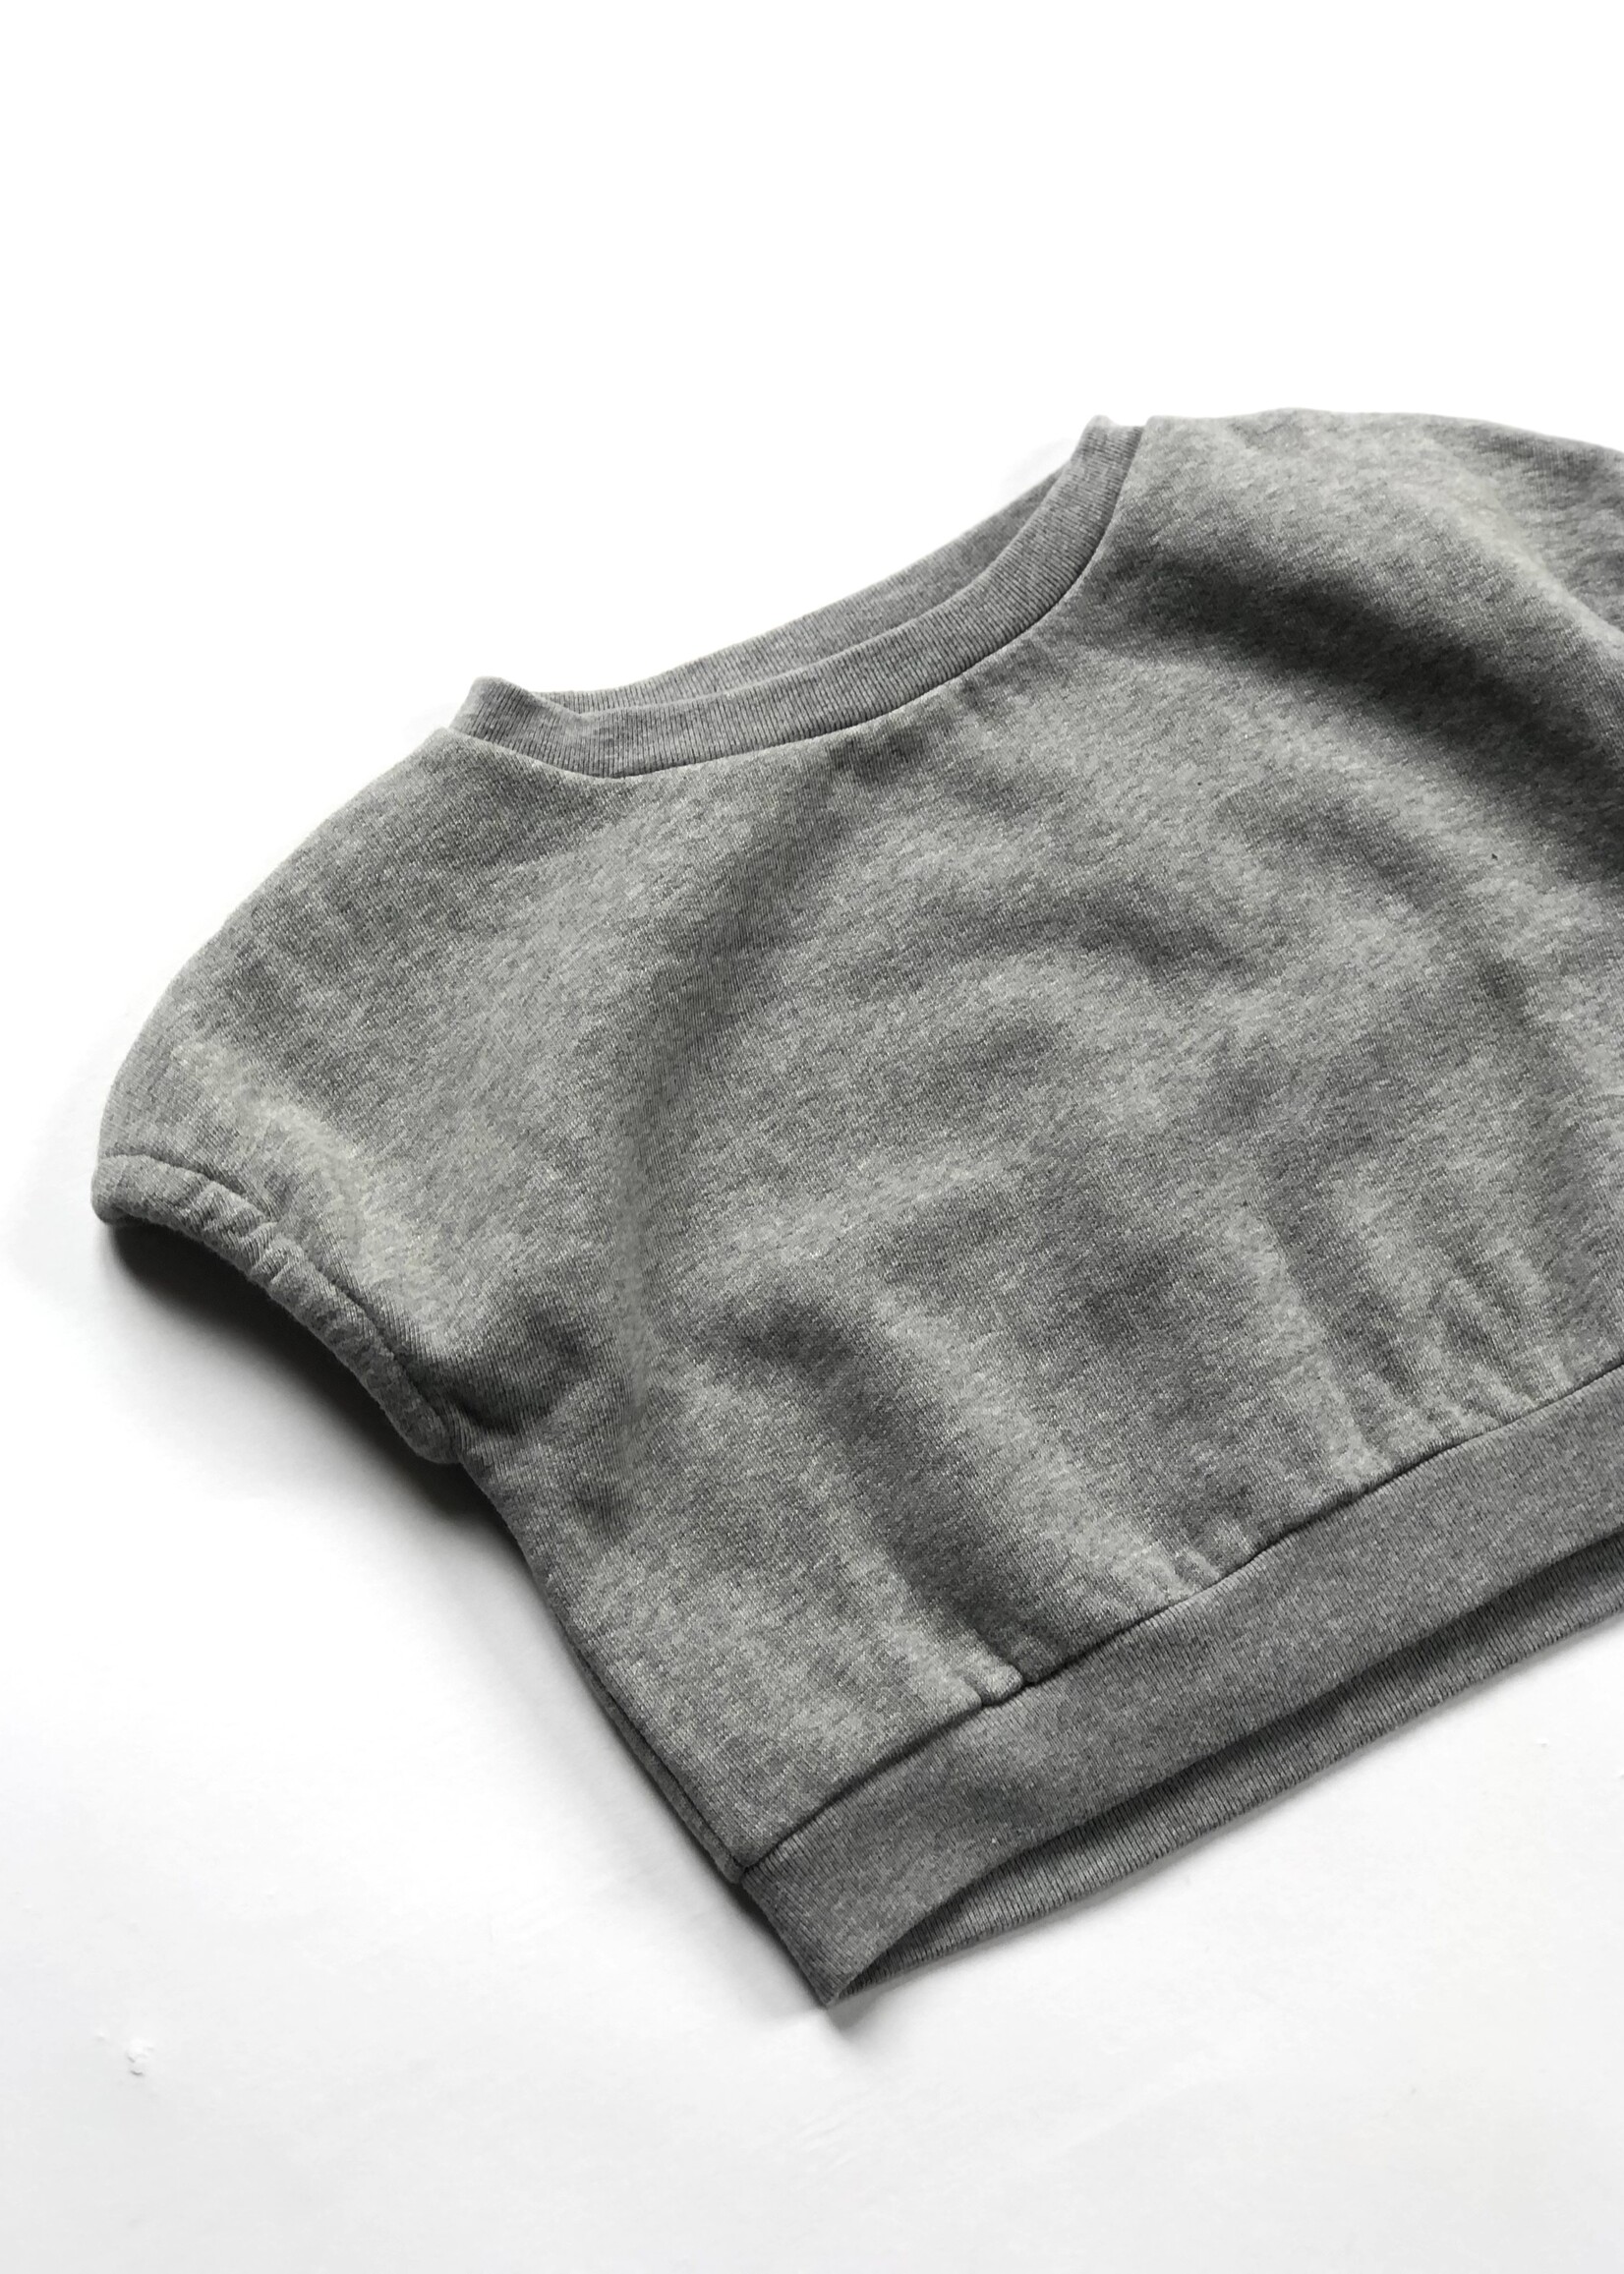 Long Live The Queen Grey sweater shirt 2-4y